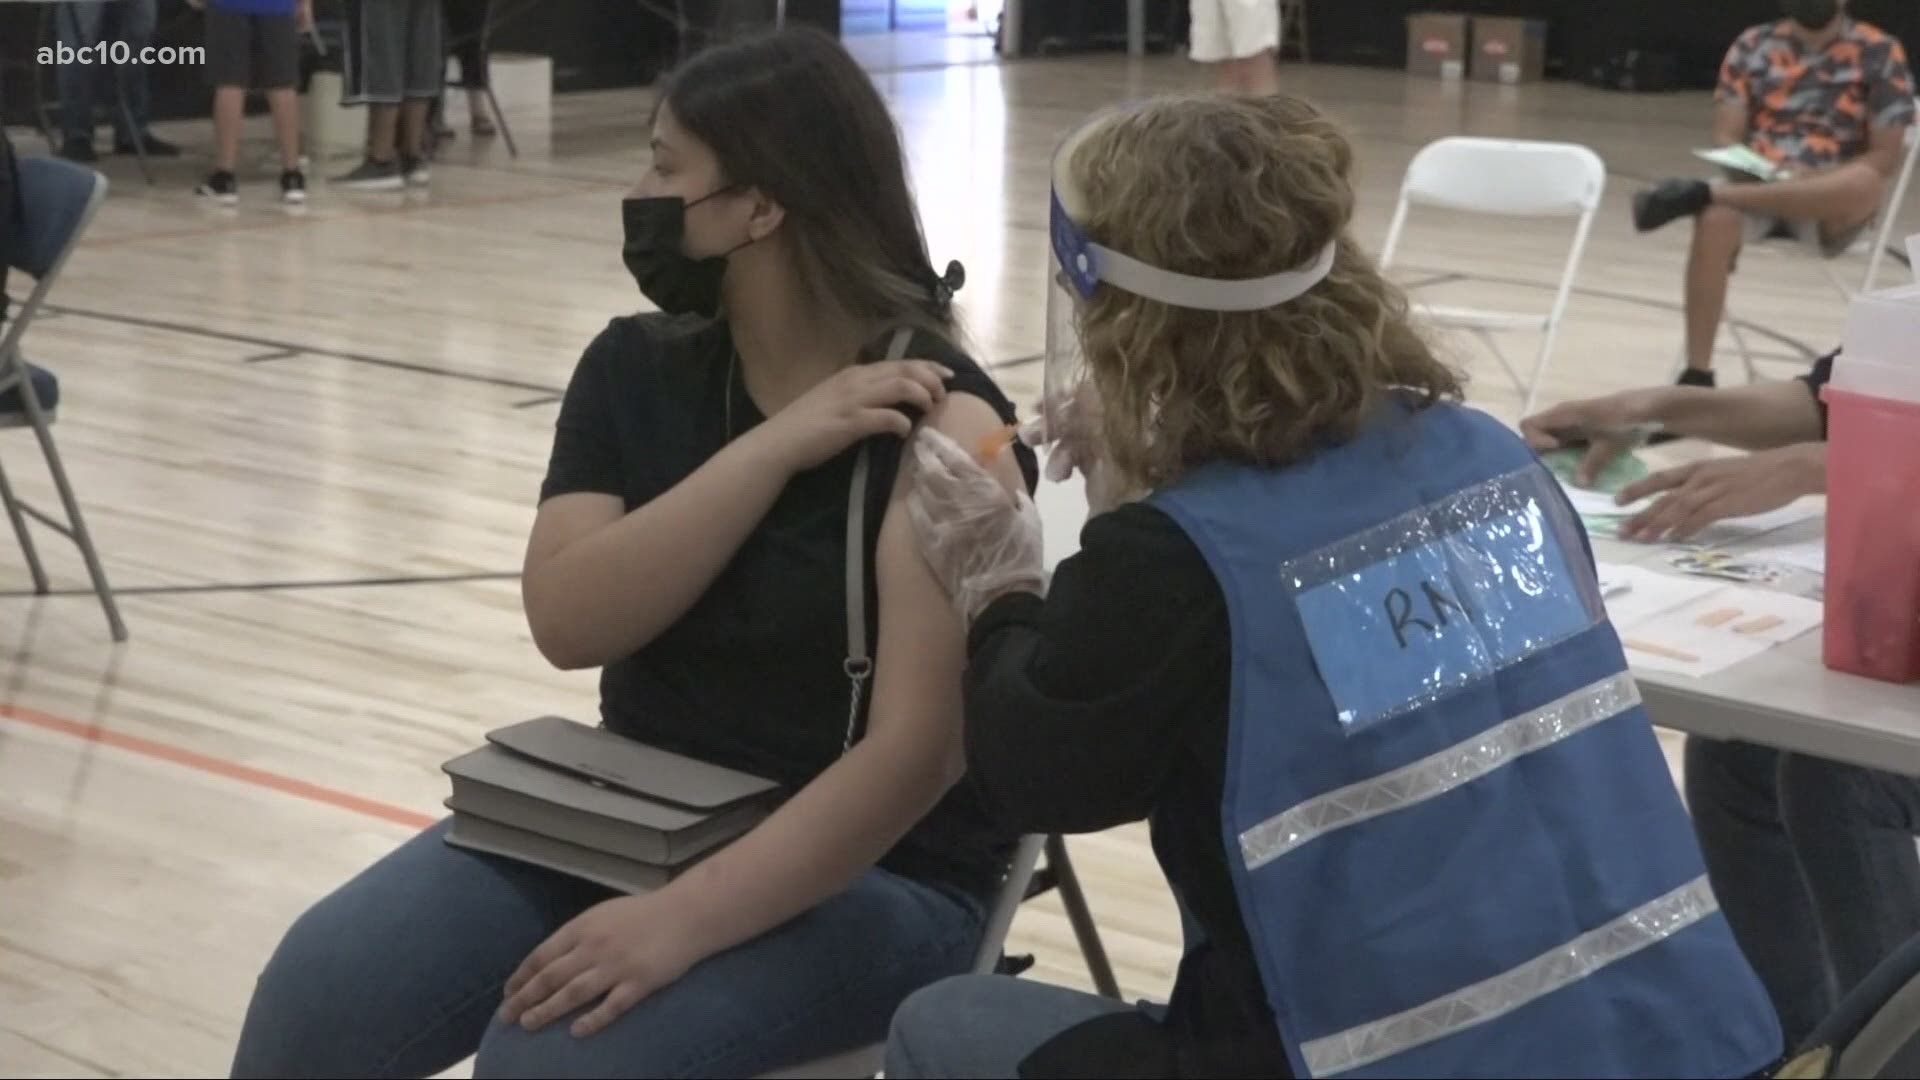 Stanislaus County joins Sacramento and Yolo counties as the latest in Northern California to suggest its residents who are fully vaccinated to mask up again.